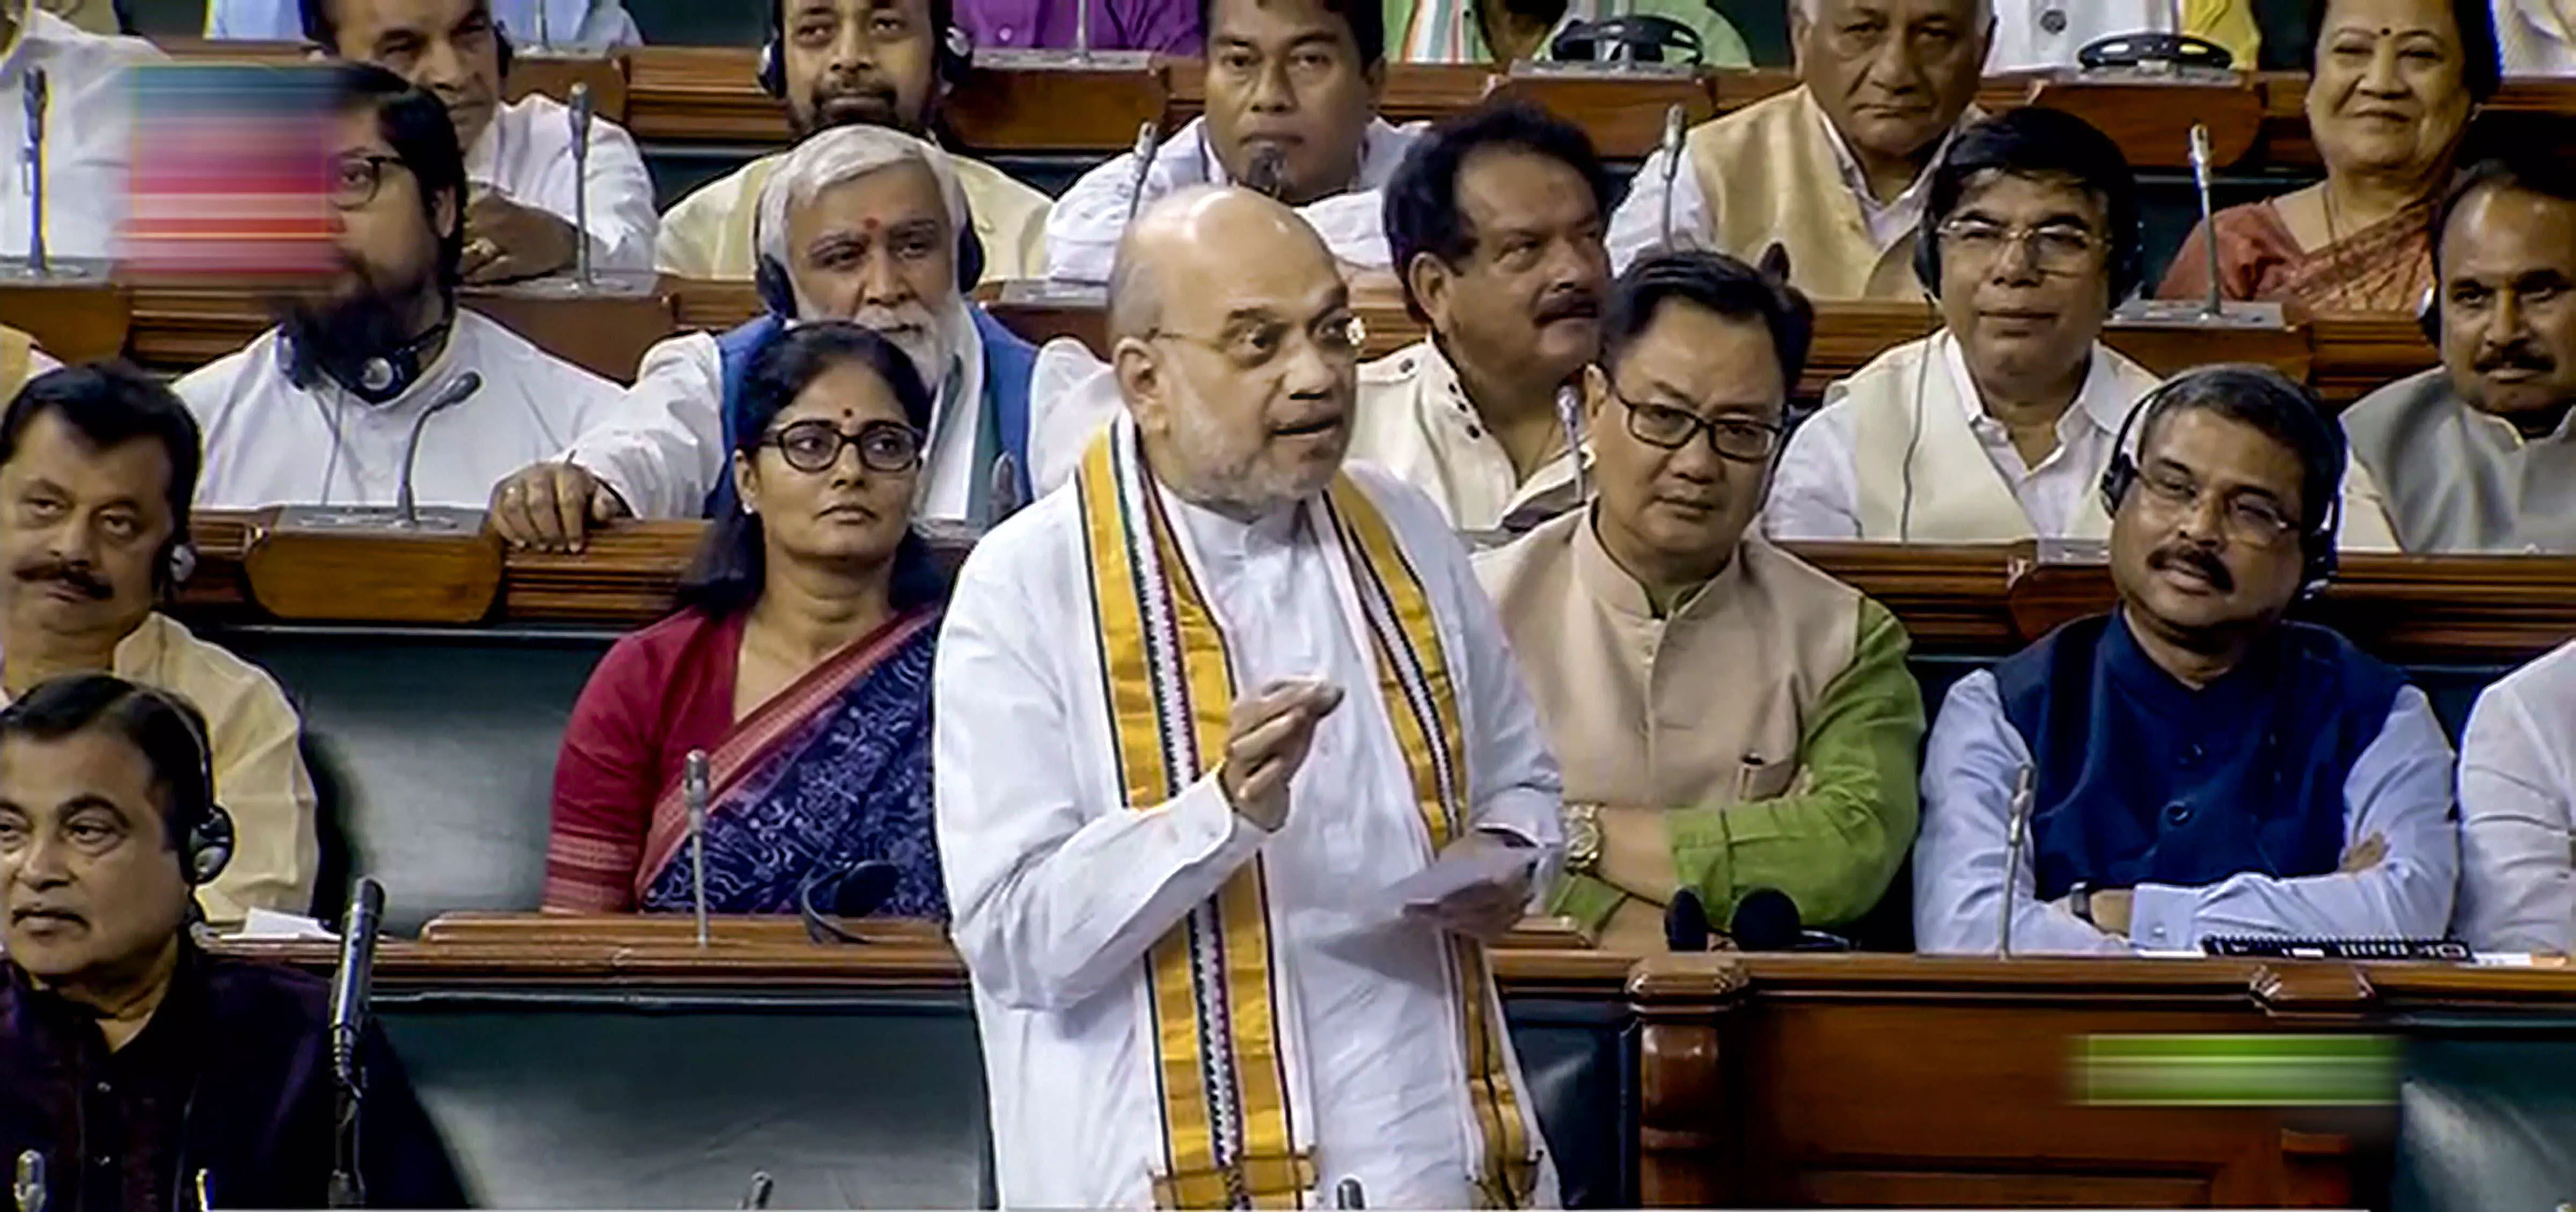 Delhi services bill passed by Lok Sabha; Shah tears into opposition alliance